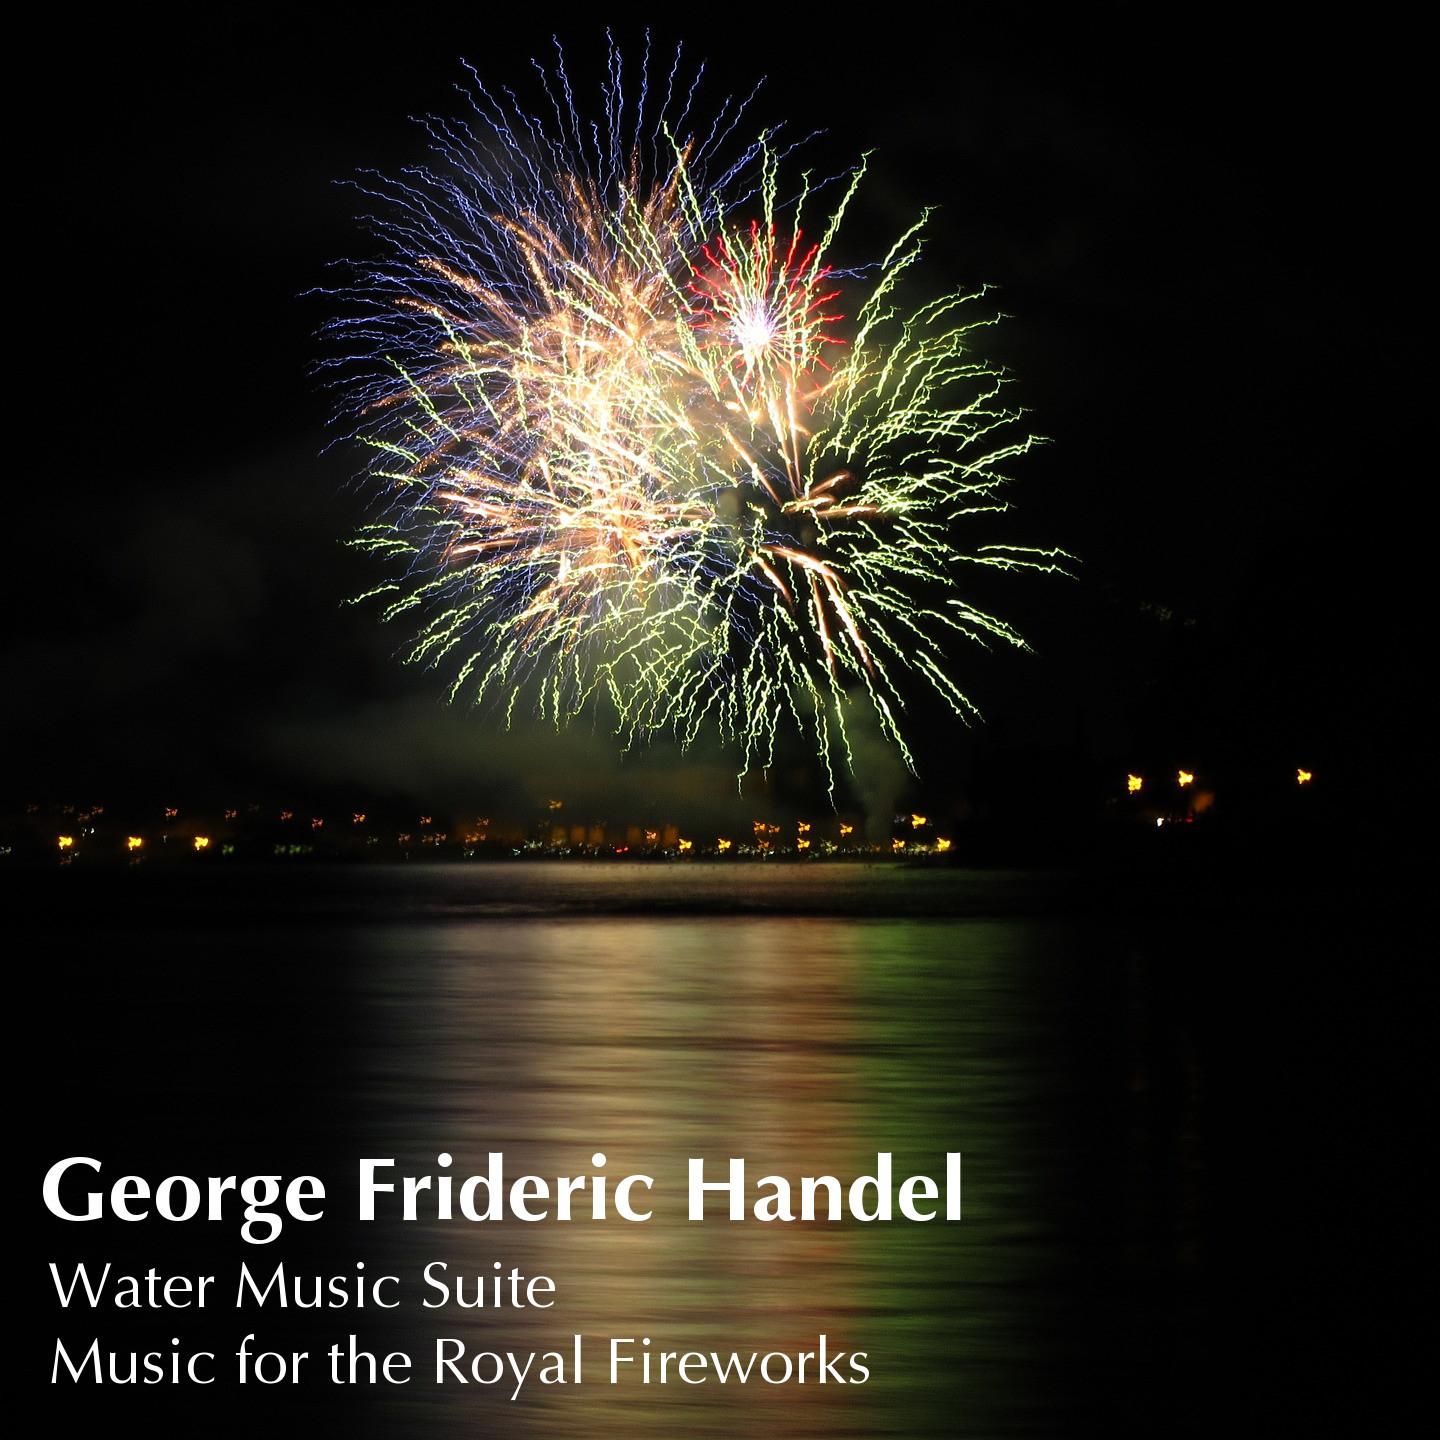 Music for the Royal Fireworks: Bourre e